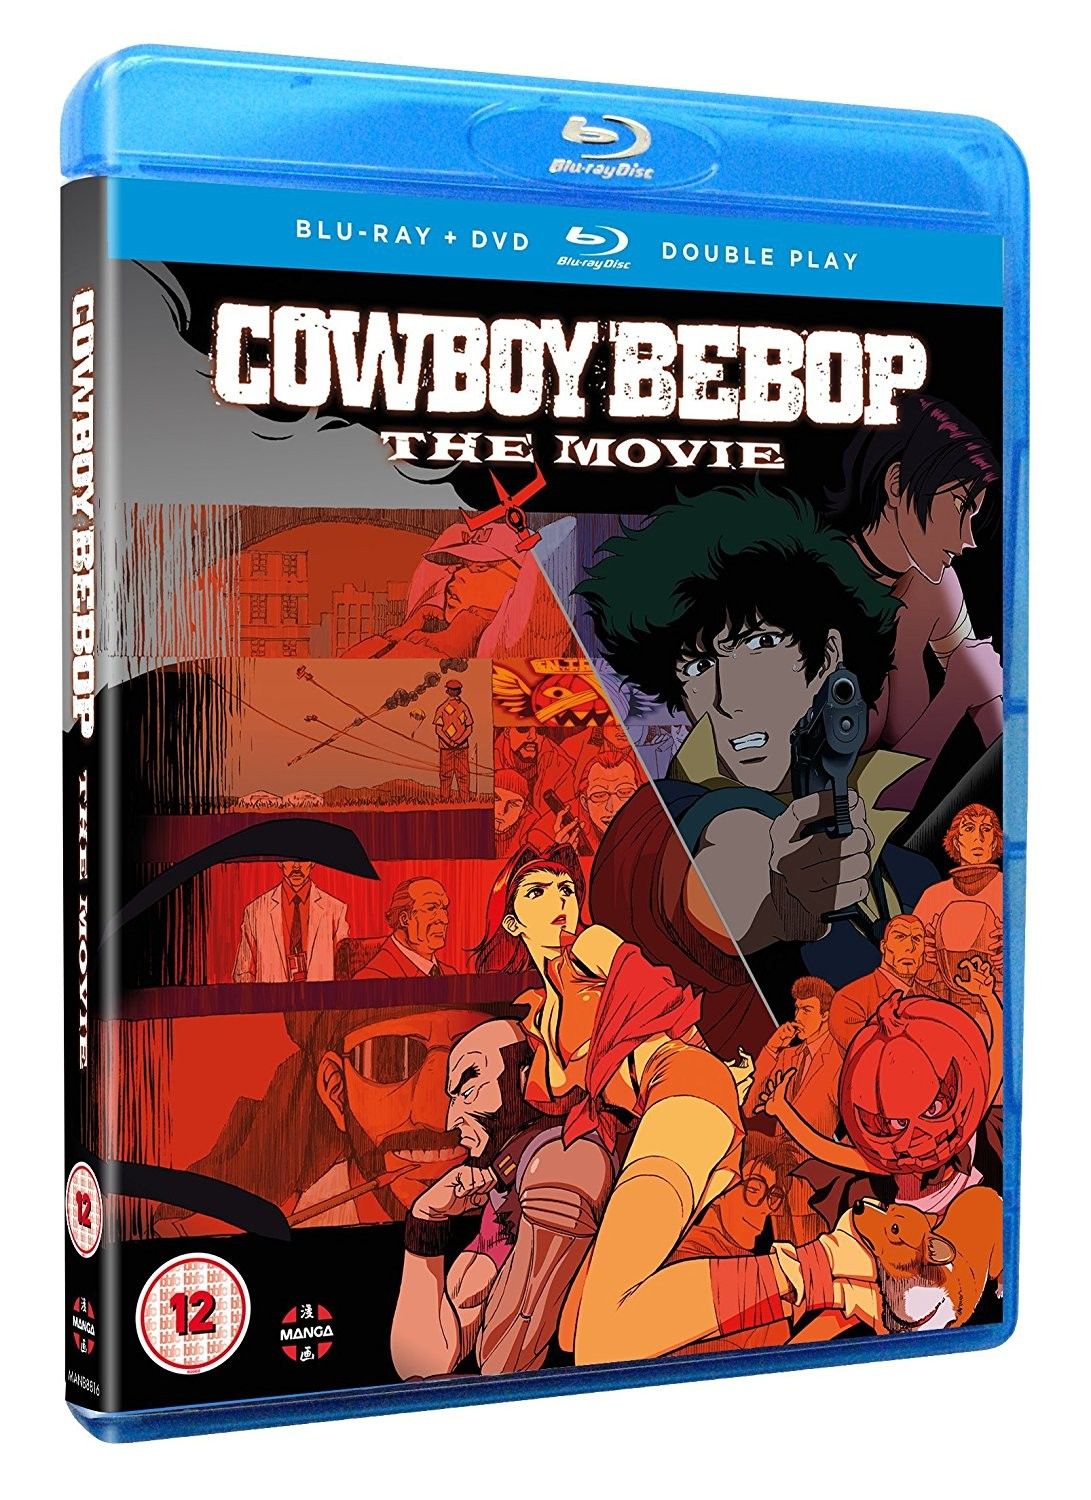 watch the cowboy bebop movie online english dubbed